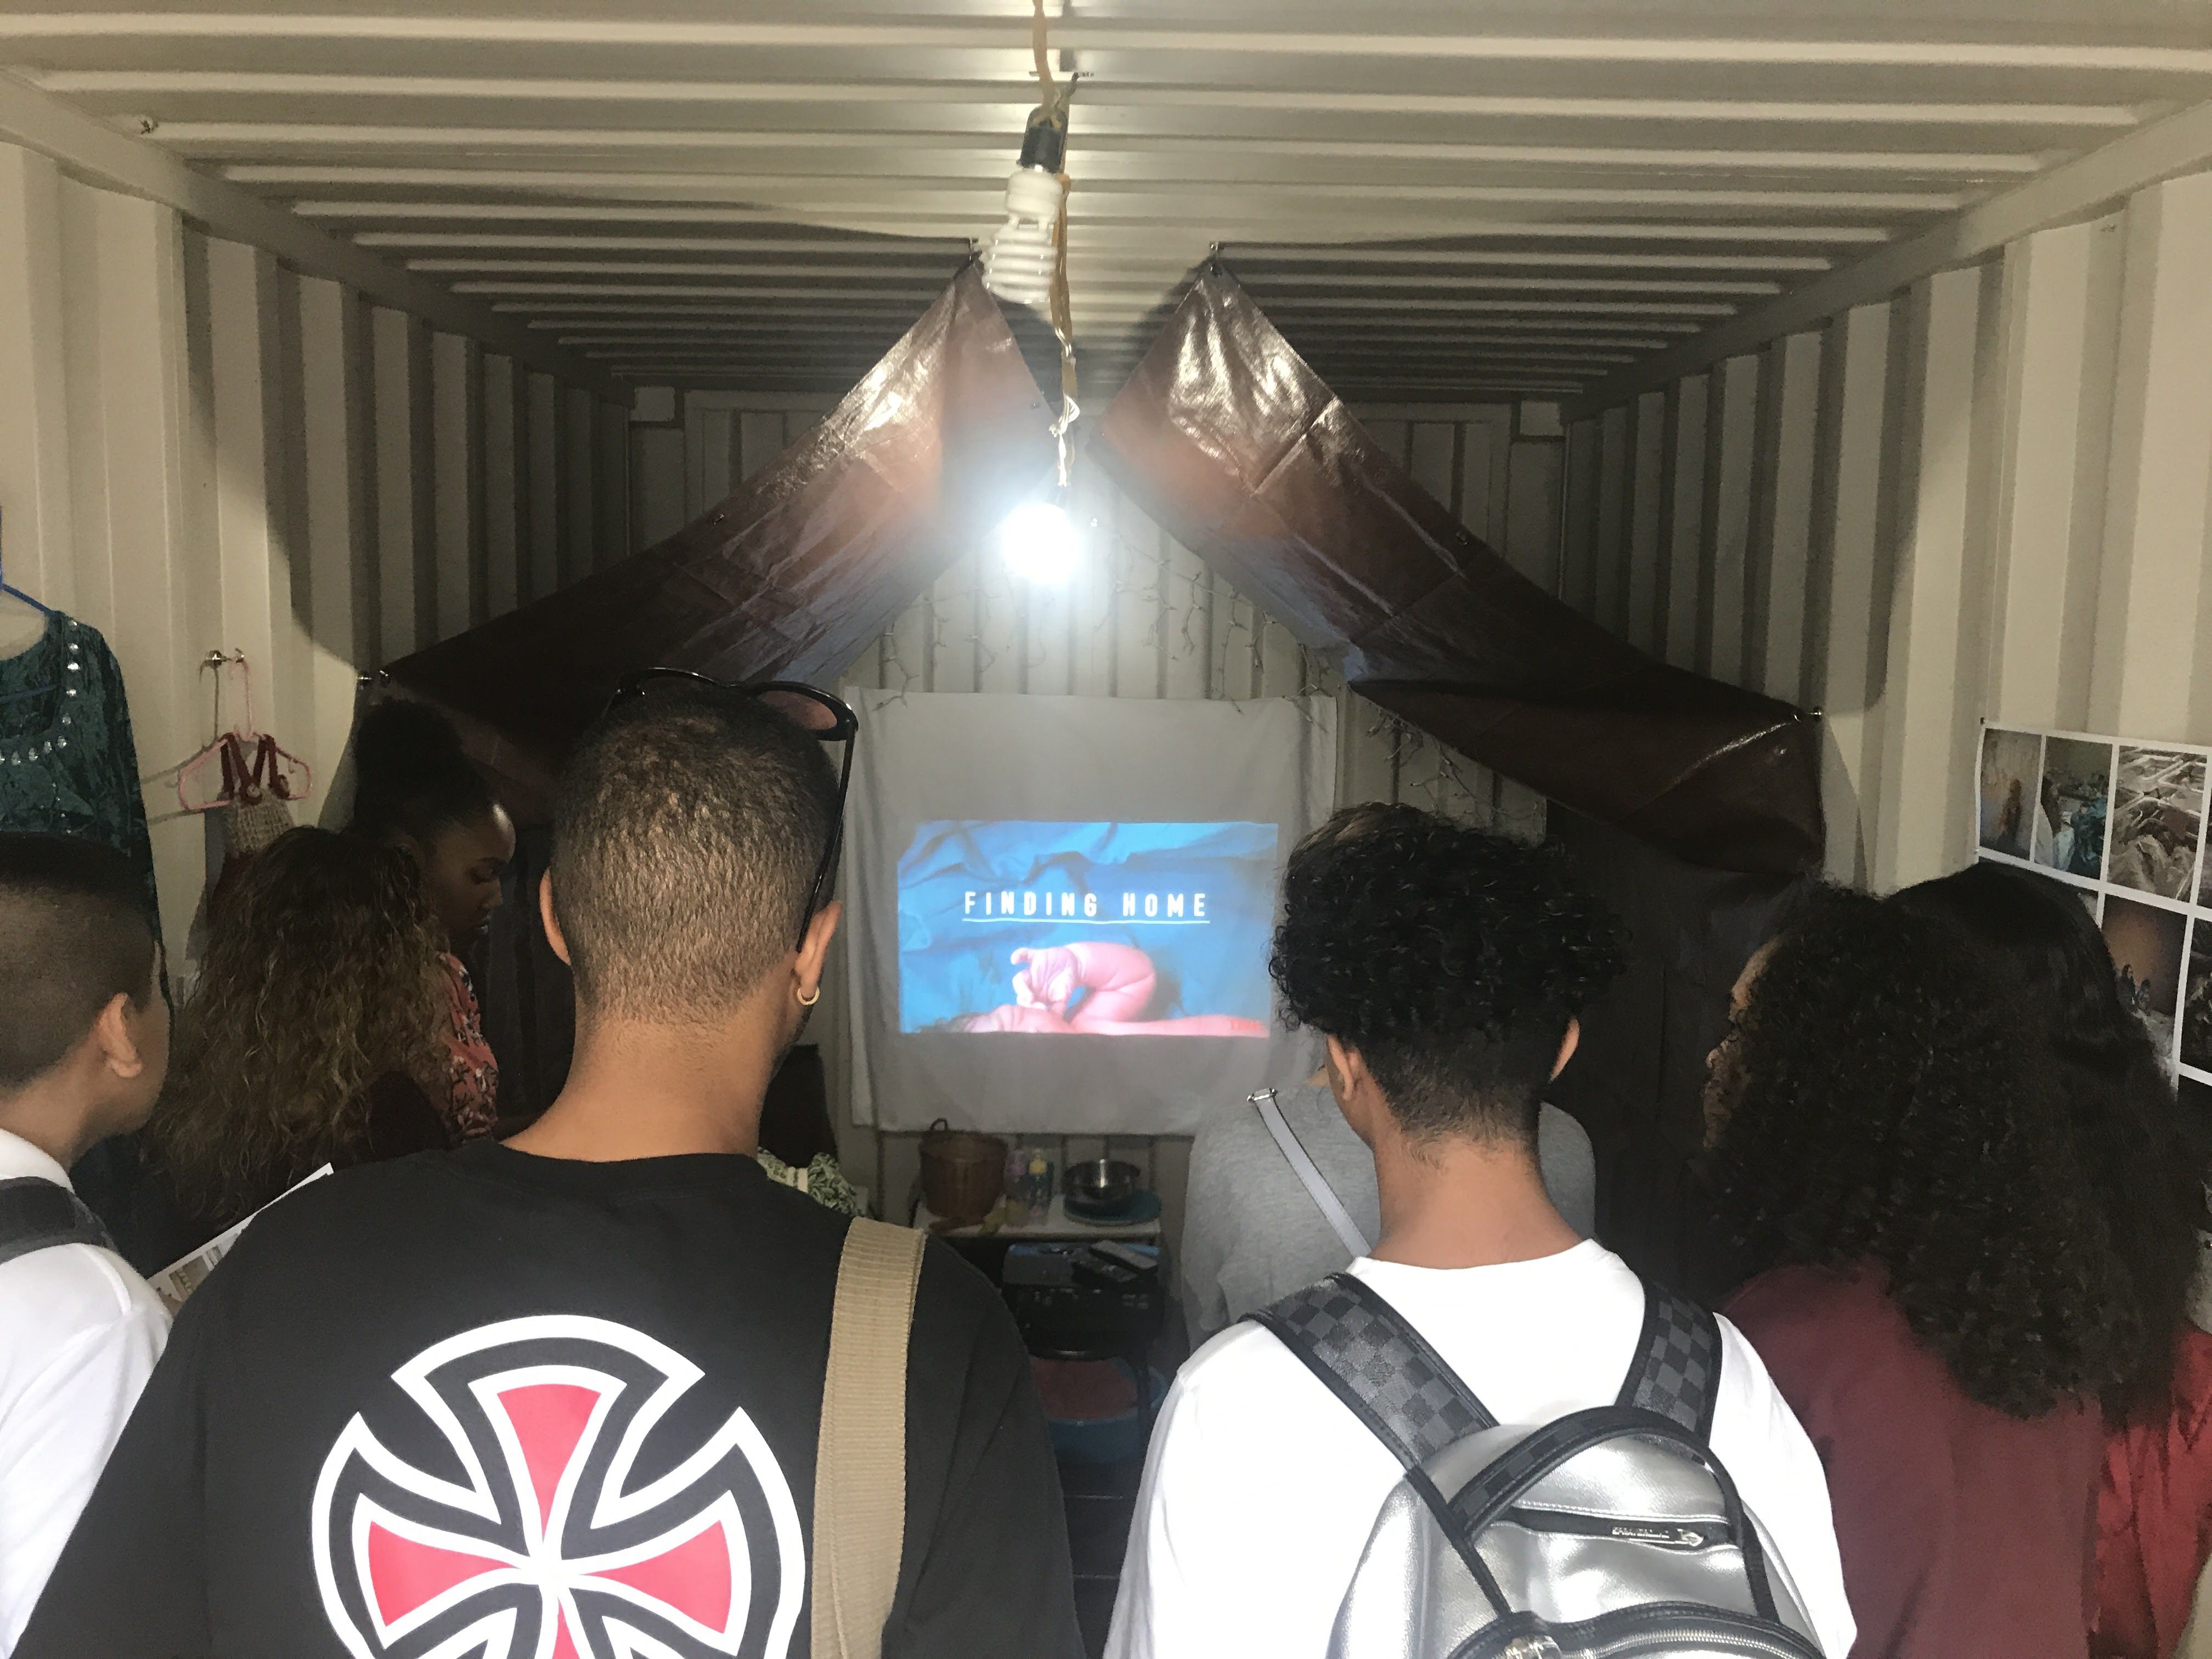 Students watch the trailer for "Finding Home" at Photoville 2017. As part of Photoville's Education Day, Pulitzer Center presented "Finding Home" to students across the four boroughs of New York City. Image by Jordan Roth. United States, 2017. 